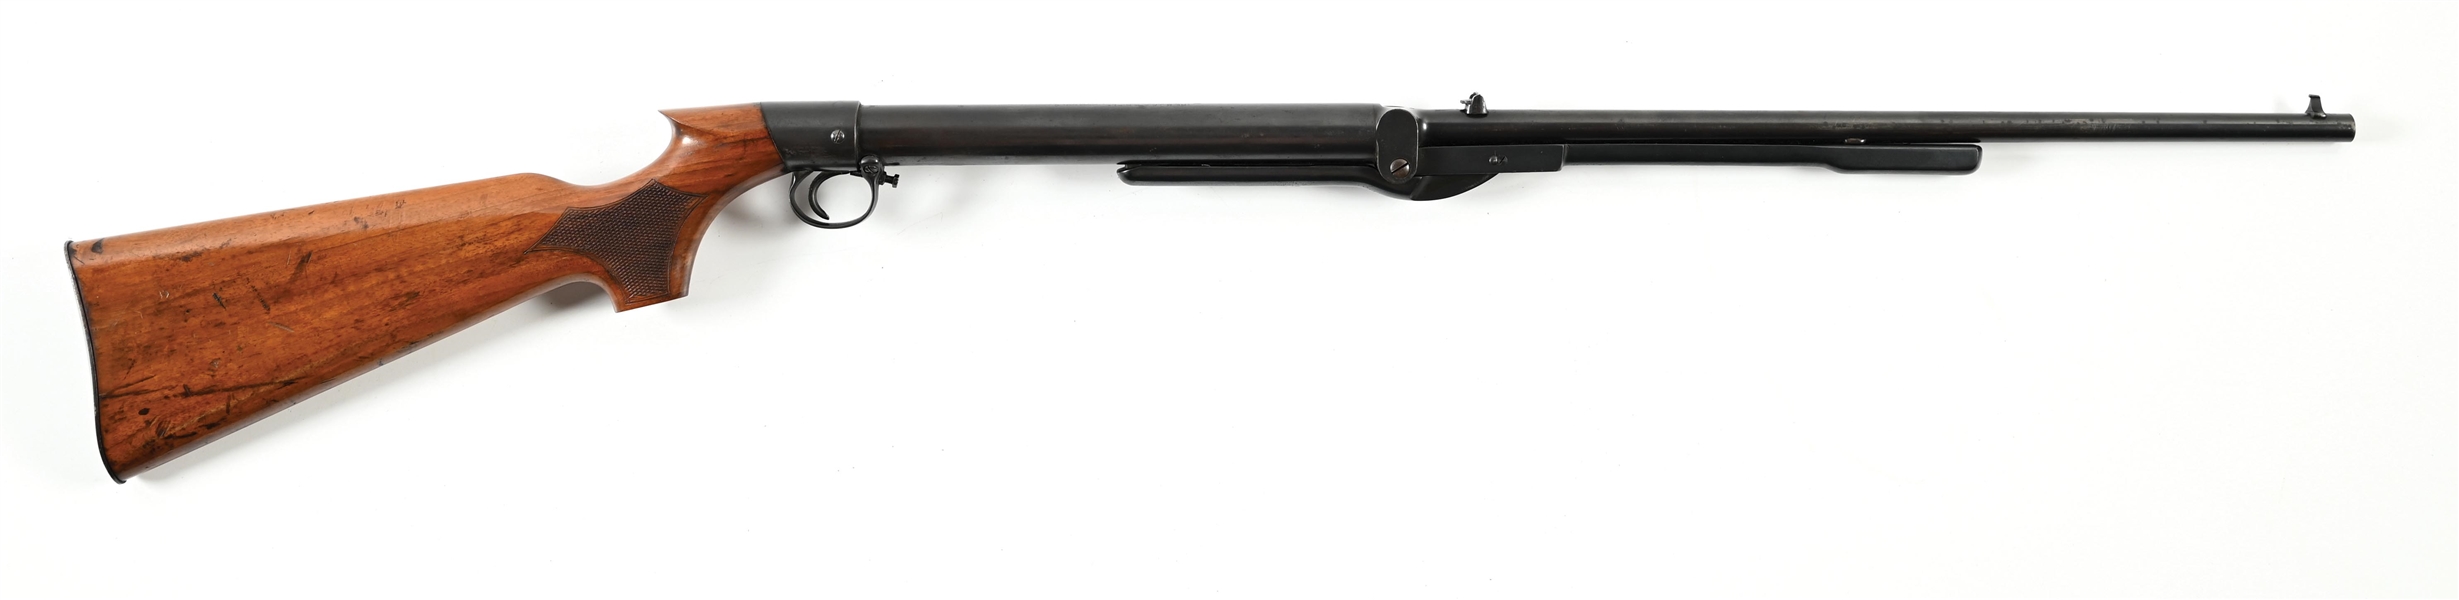 PRE WWI BRITISH SMALL ARMS IMPROVED MODEL D AIR RIFLE.